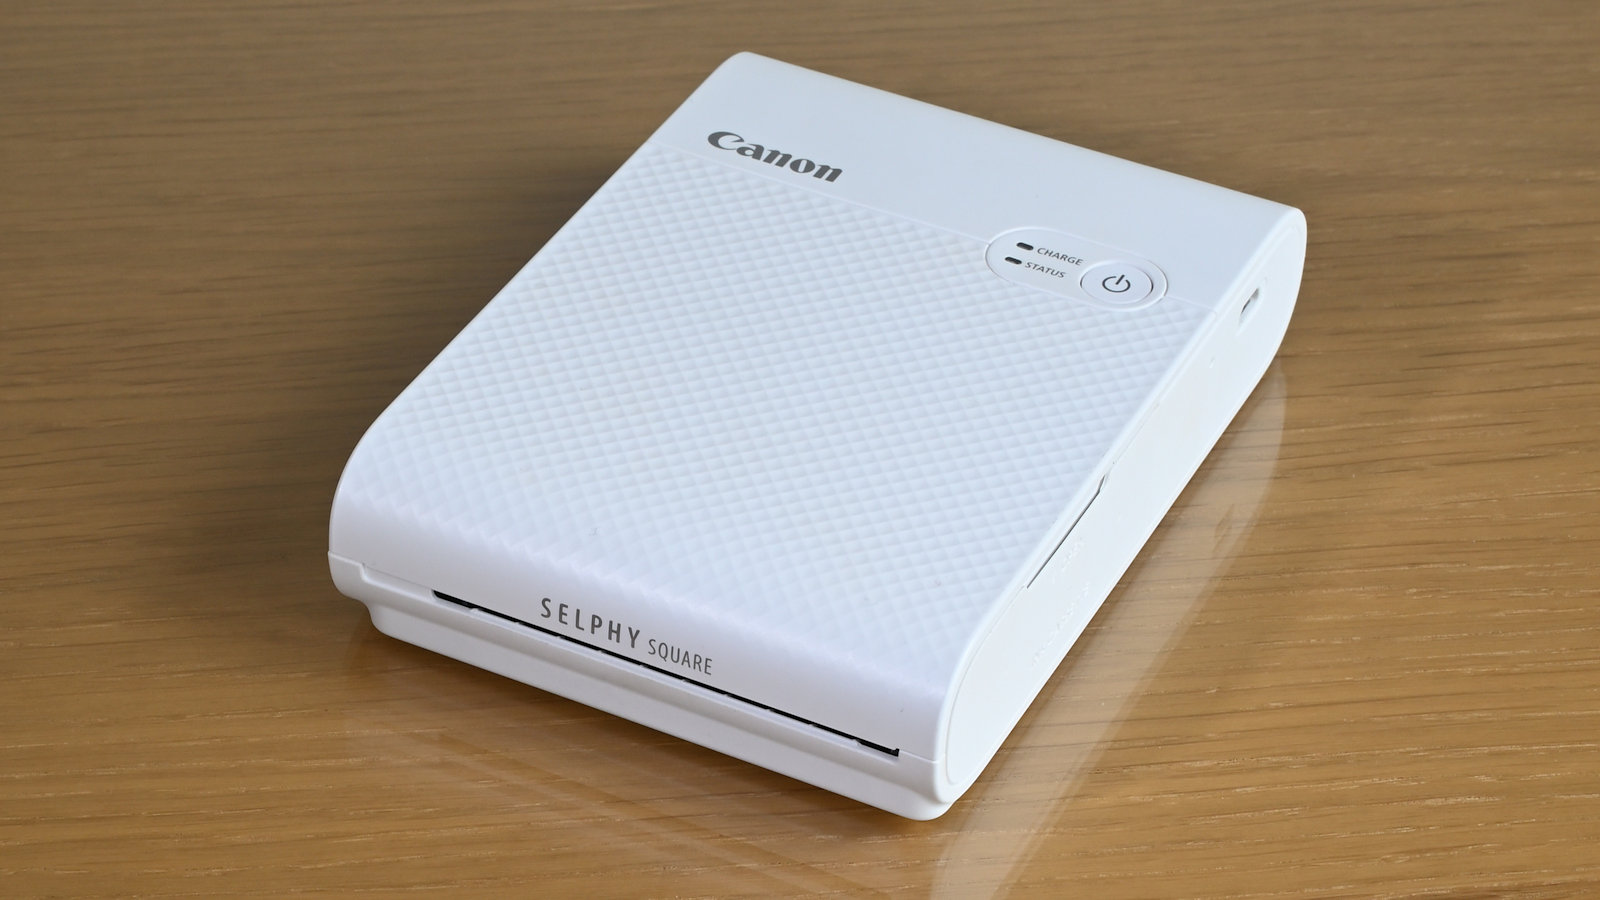 Canon Selphy Square QX10 photo printer review: Going square